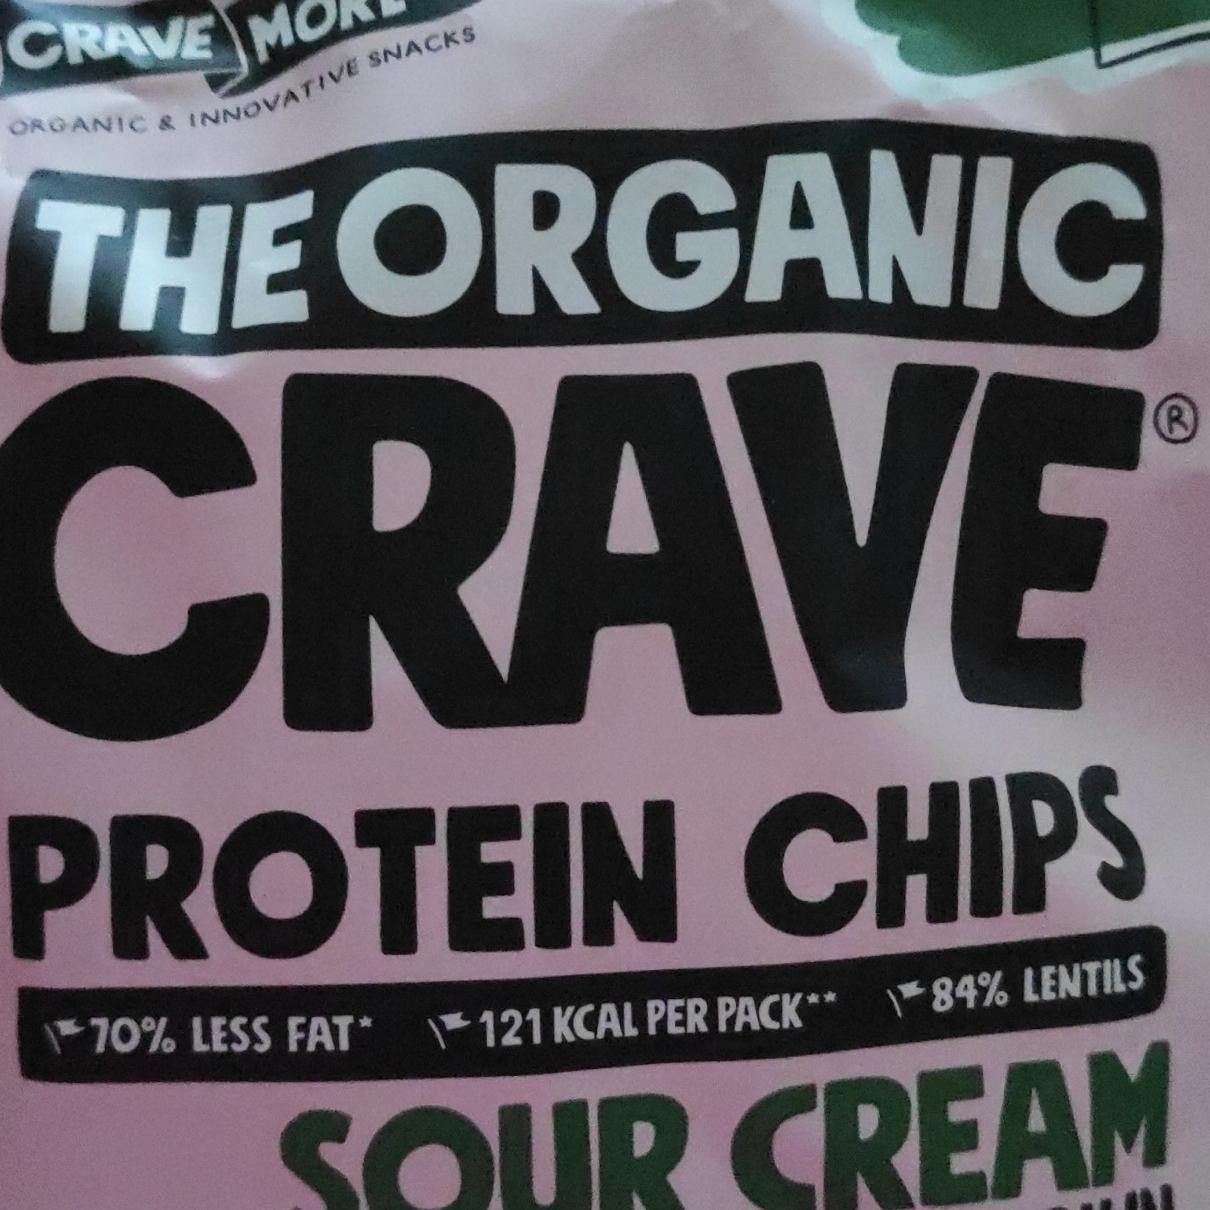 Fotografie - Protein Chips Sour Cream & Onion The Organic Crave